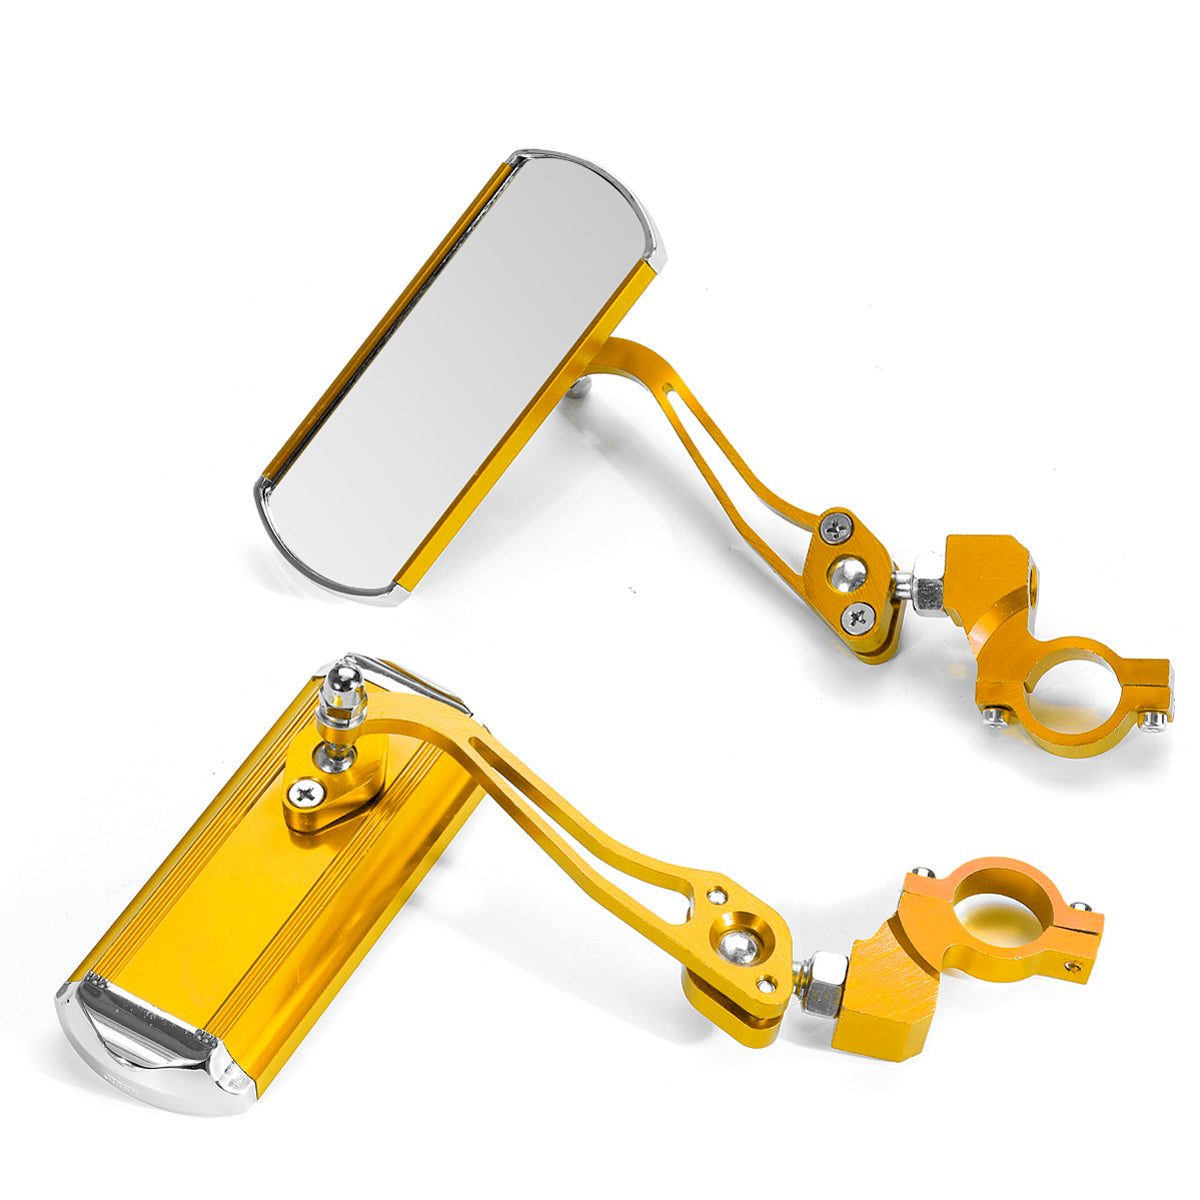 Goldenrod Pair 360° Rotate Rearview Mirrors Adjustable Aluminum Alloy Cycling Bike Mirror Motorcycle